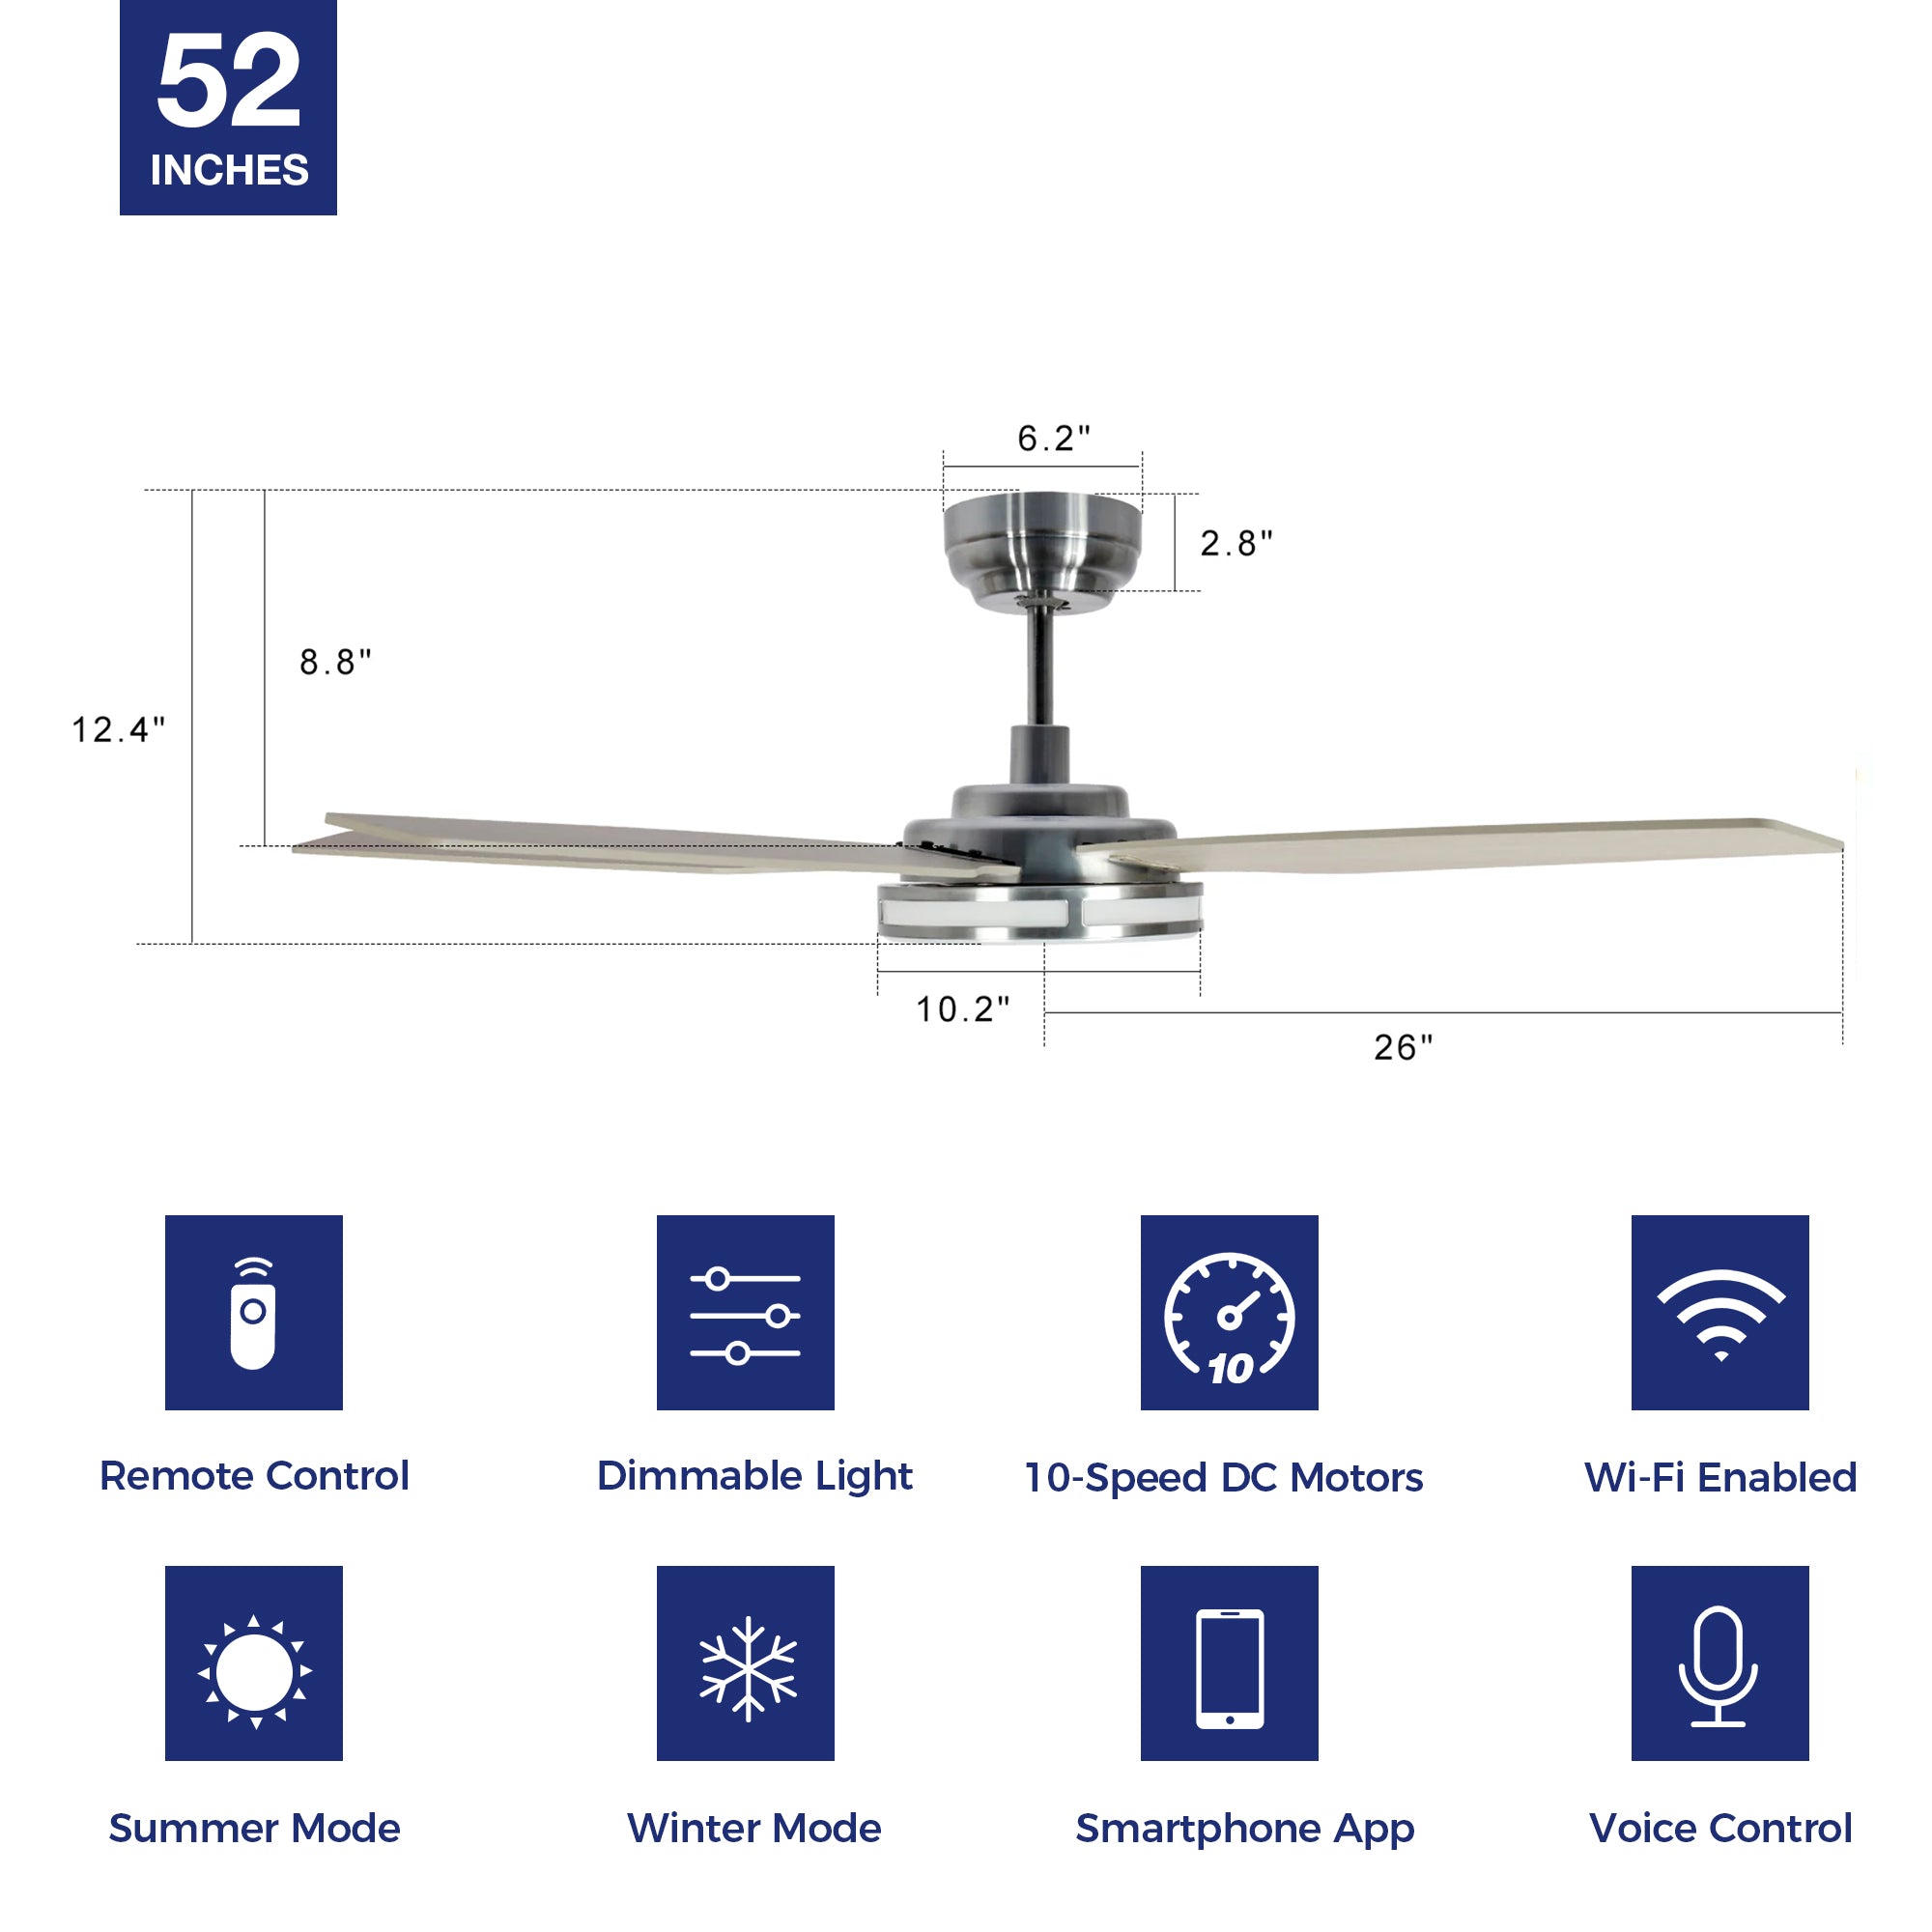 Explorer Outdoor 52&quot; Smart Ceiling Fan with LED Light Kit in dinning room,kitchen,bedroom and living room-unit size.The fan features Remote control, Wi-Fi apps and Voice control technology (compatible with Amazon Alexa and Google Home Assistant ) to set fan preferences. 